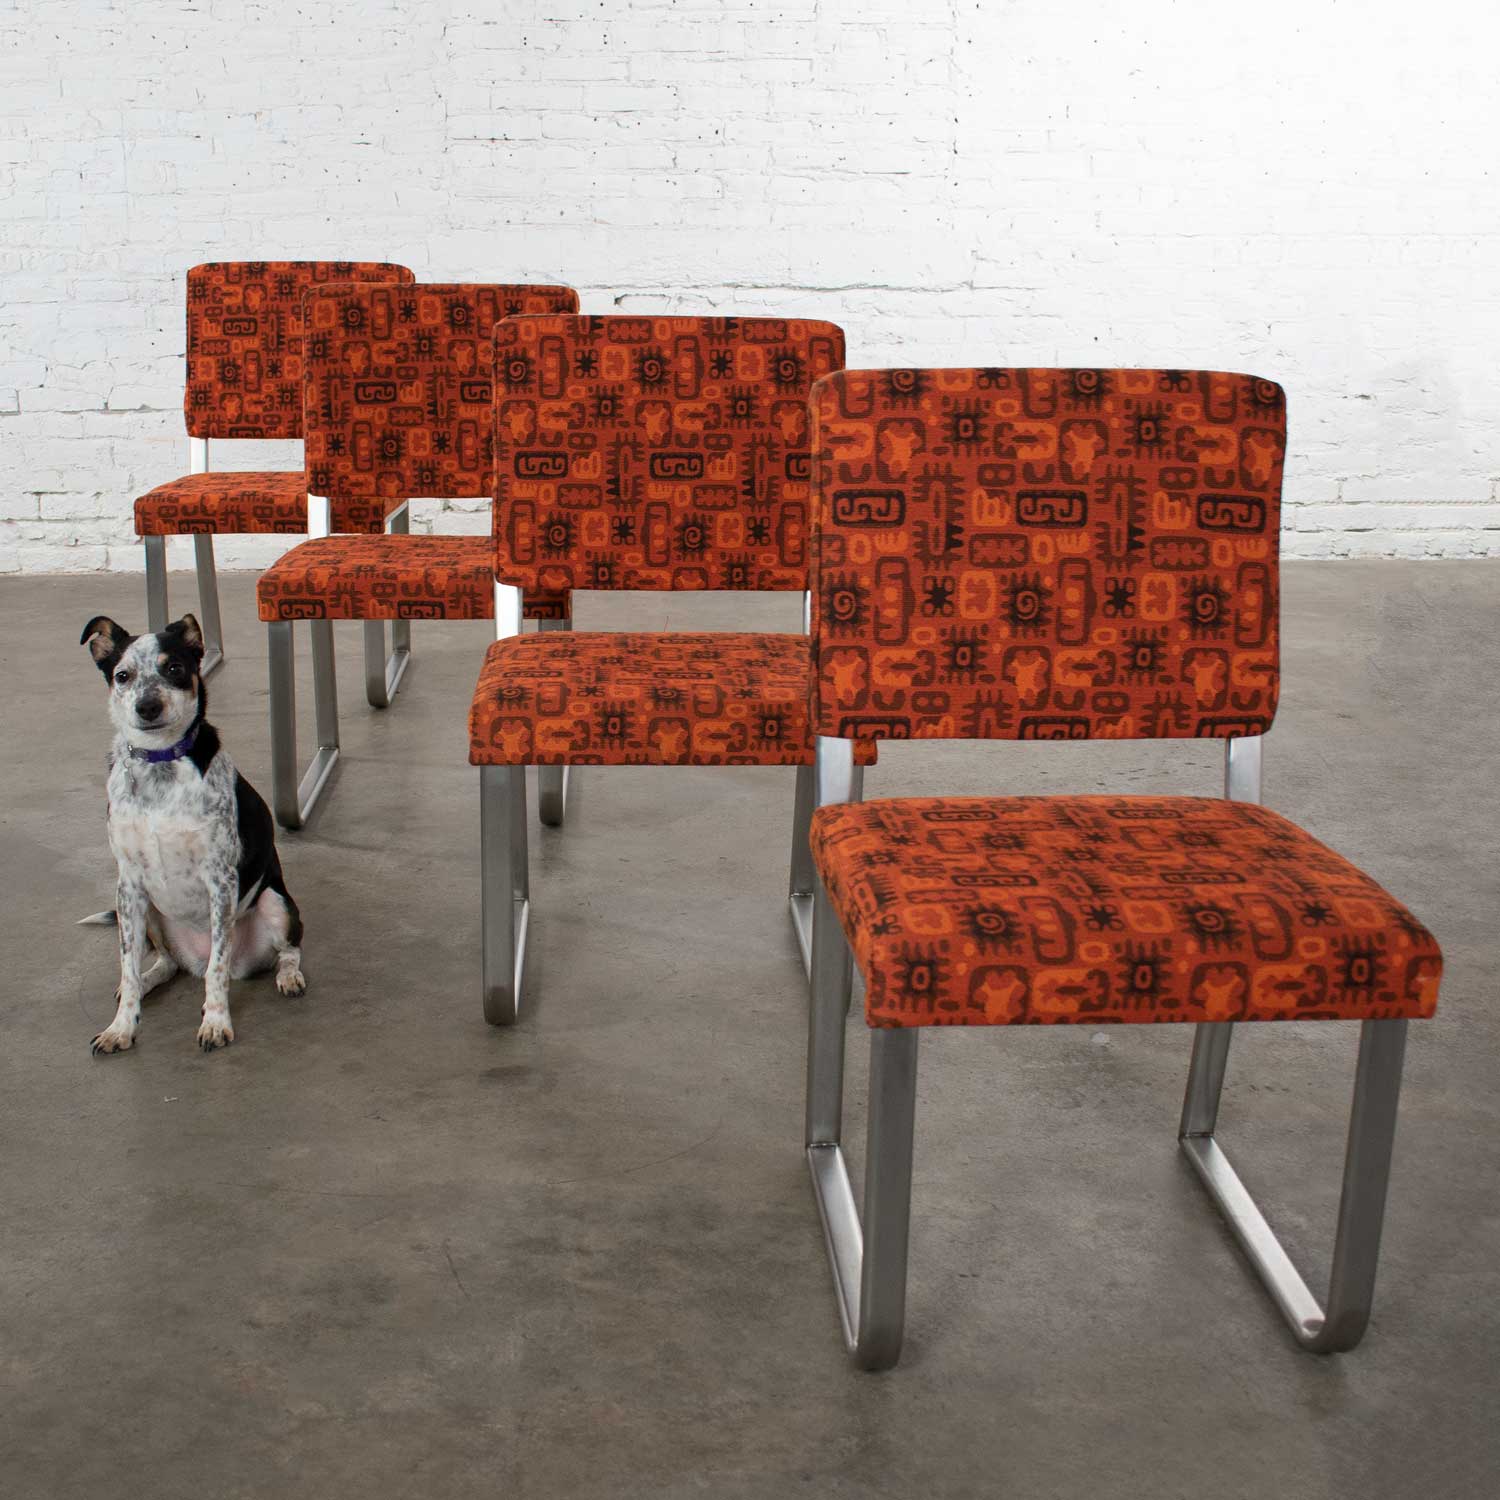 4 Streamline Modern Railroad Dining Car Chairs in Stainless Steel & Orange Abstract Upholstery